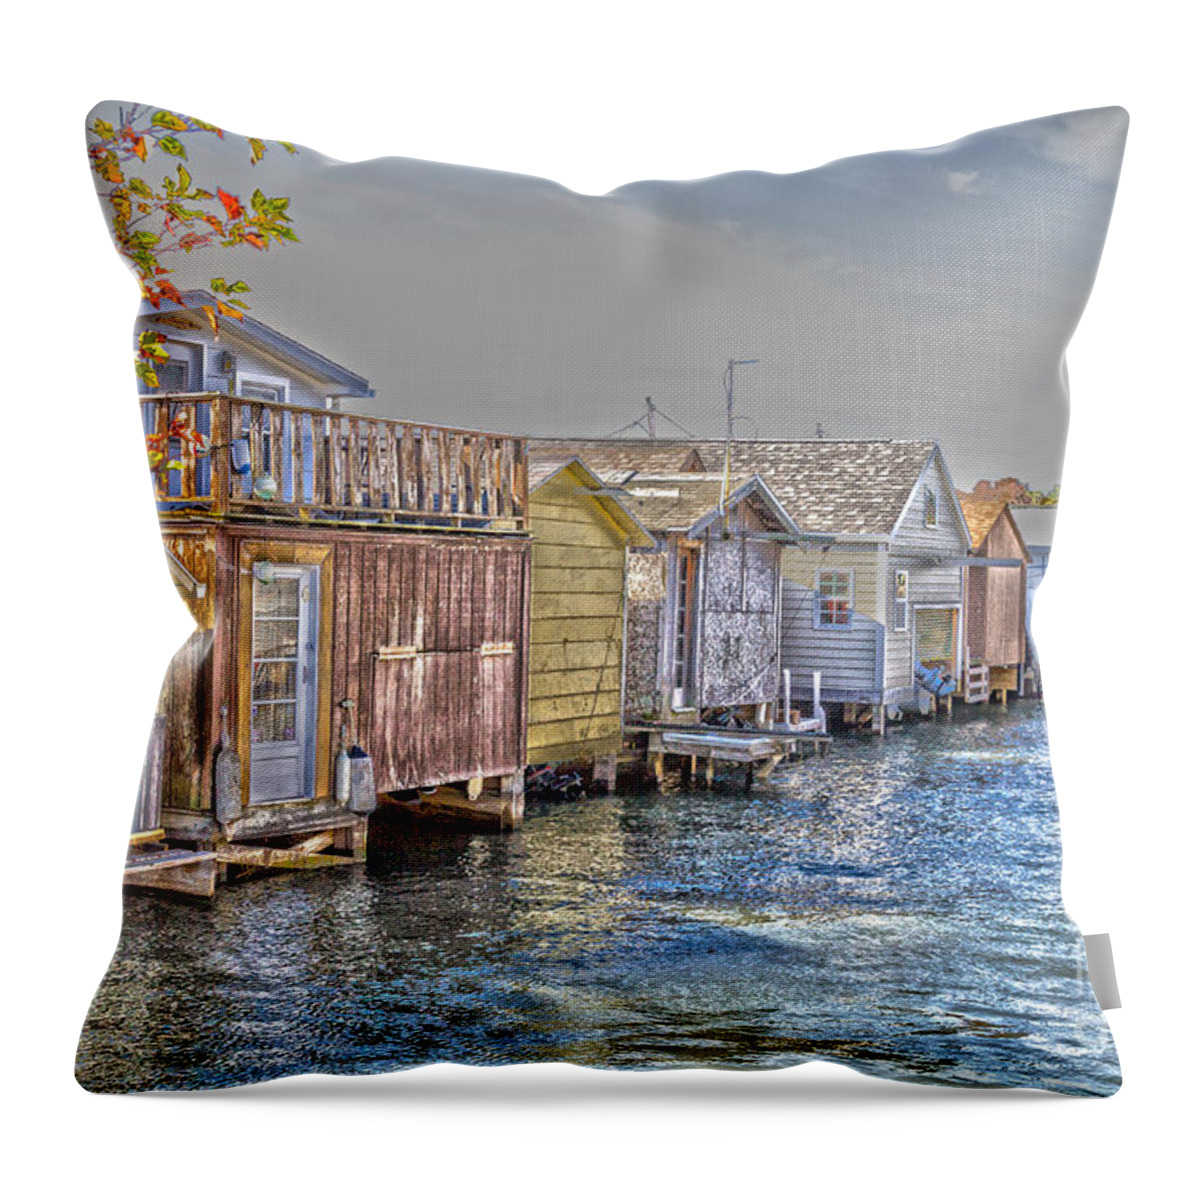 Boathouse Throw Pillow featuring the photograph Row of Boathouses by William Norton